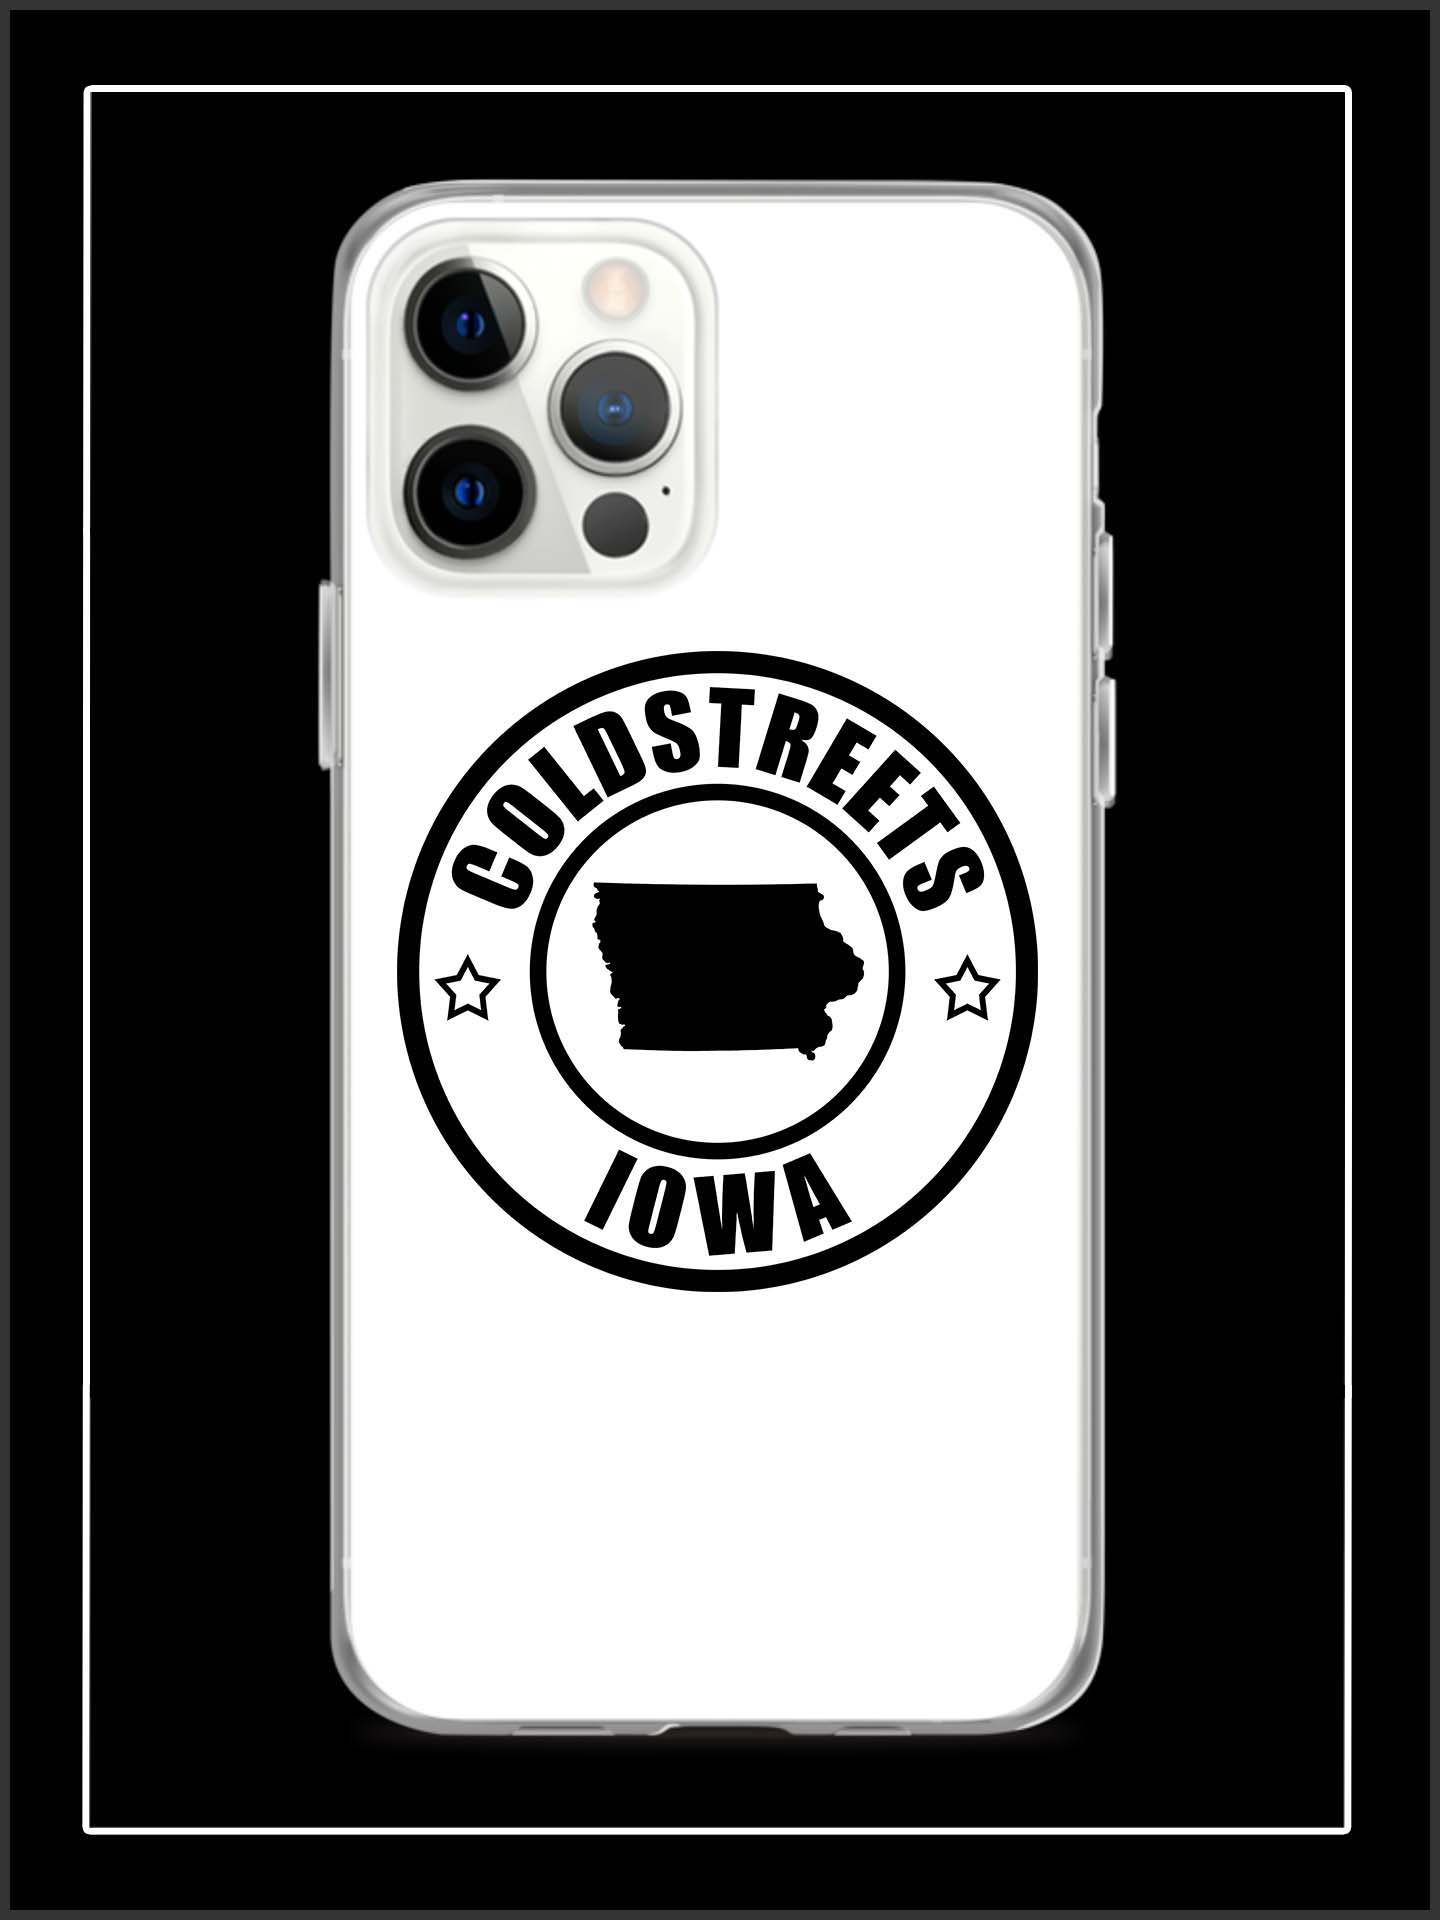 Cold Streets Iowa iPhone Cases